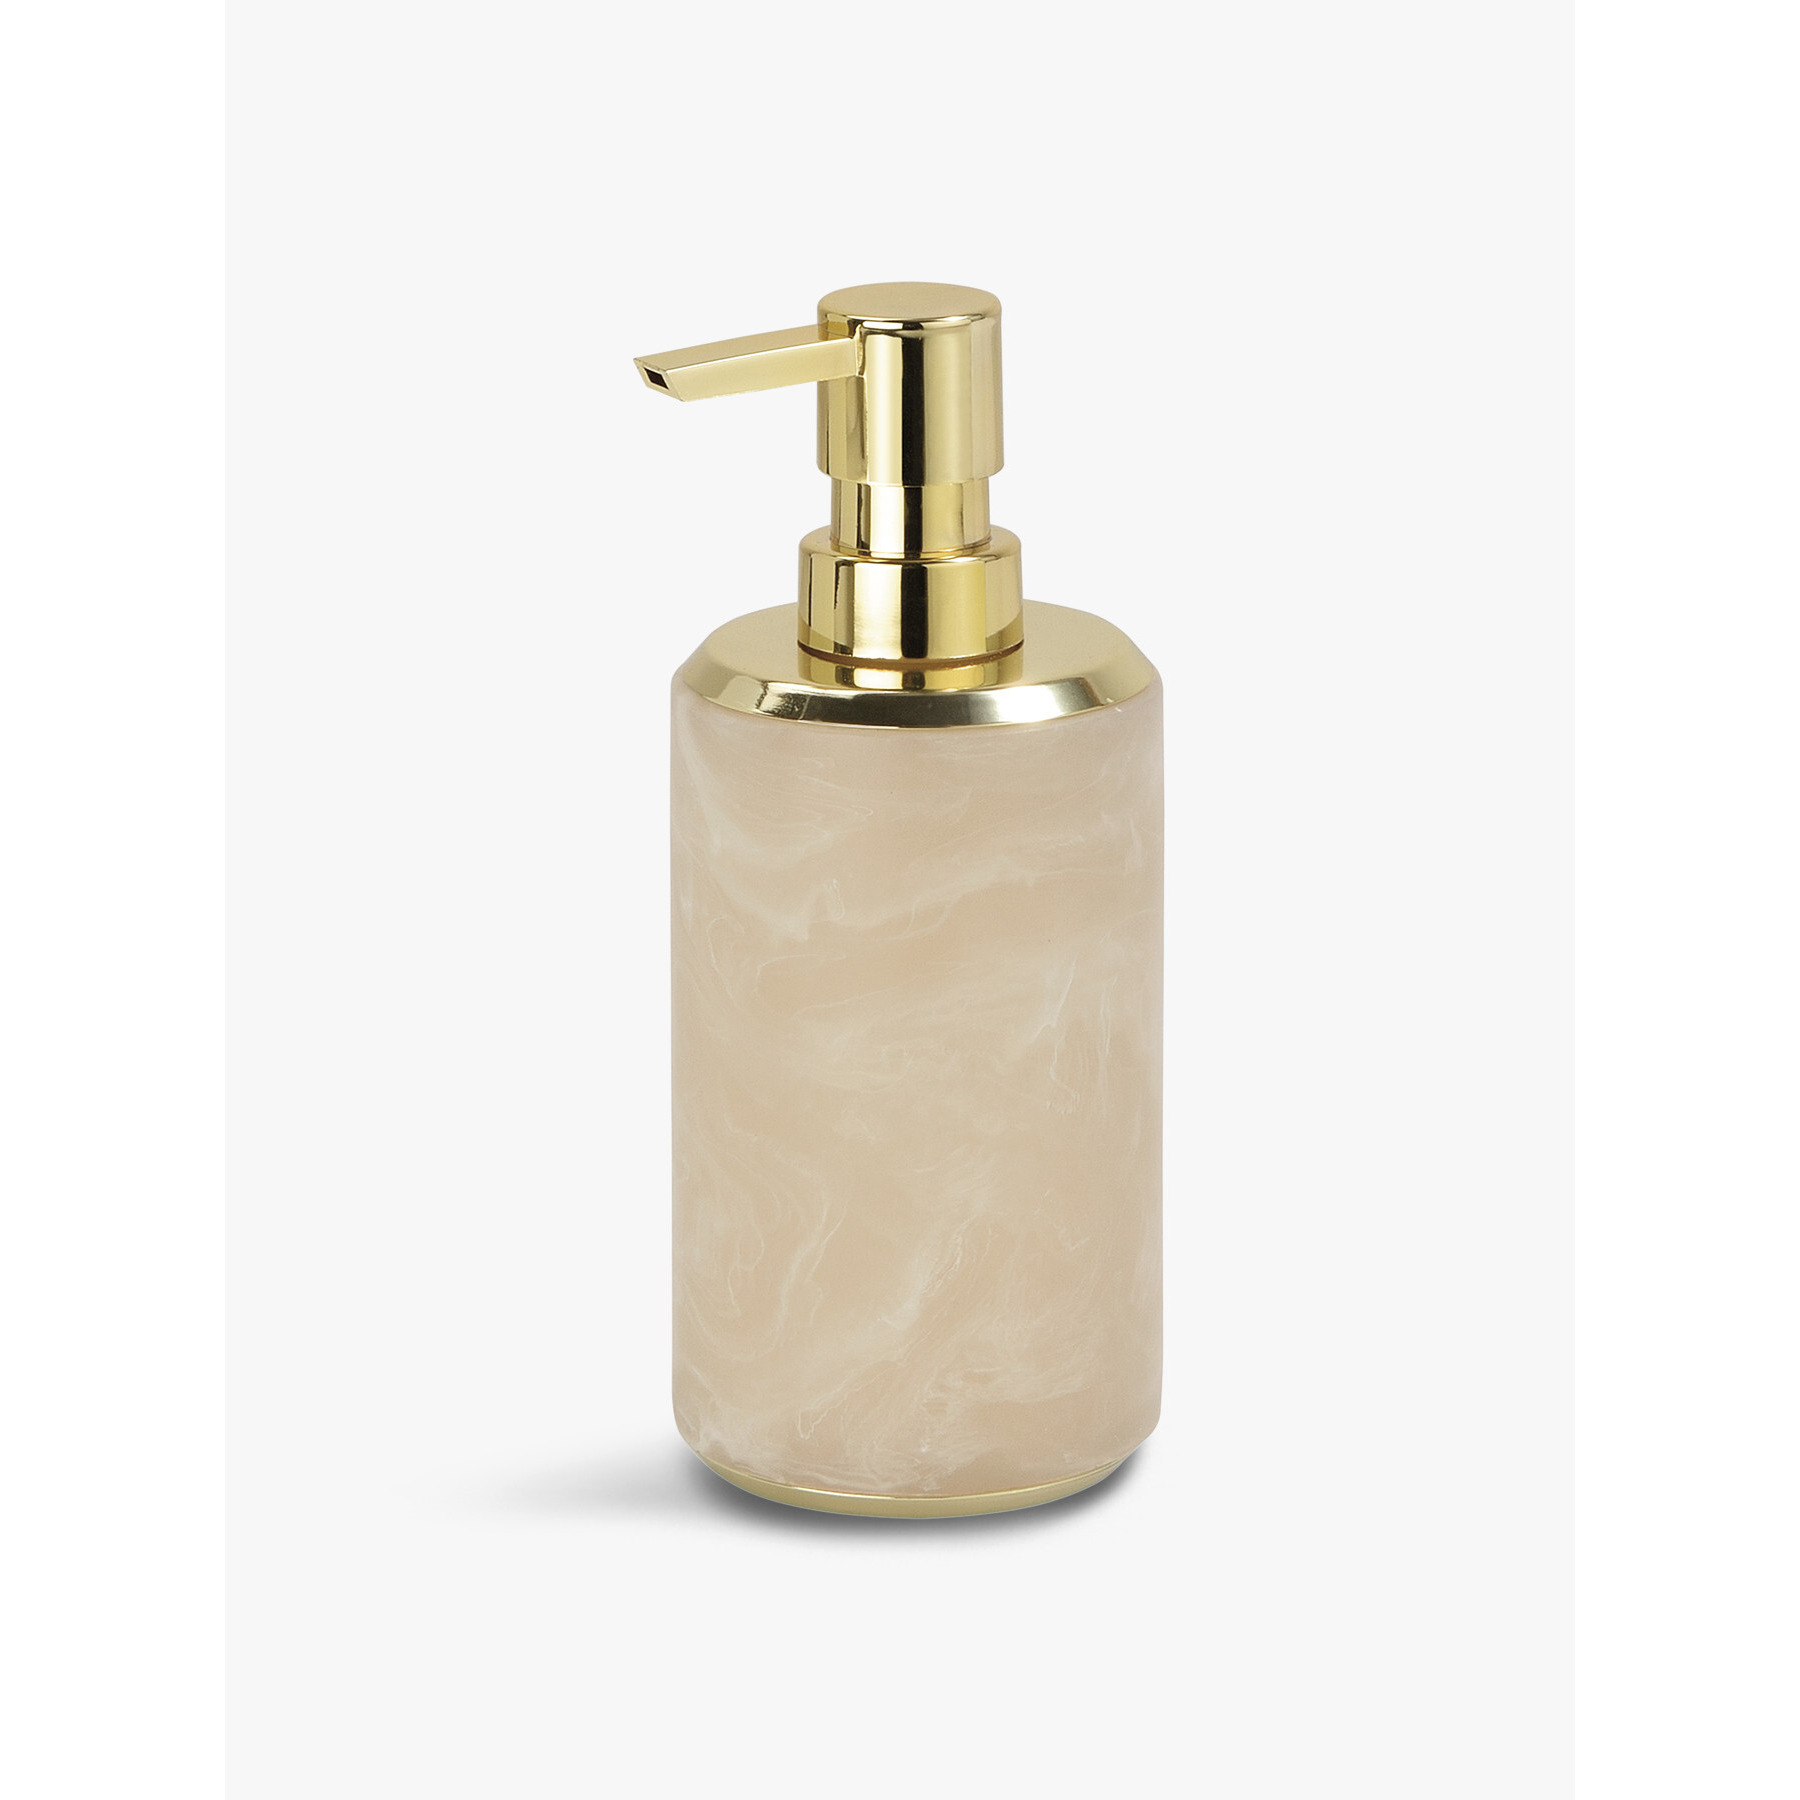 Andrea House Cloudy Gold Soap Dispenser - image 1